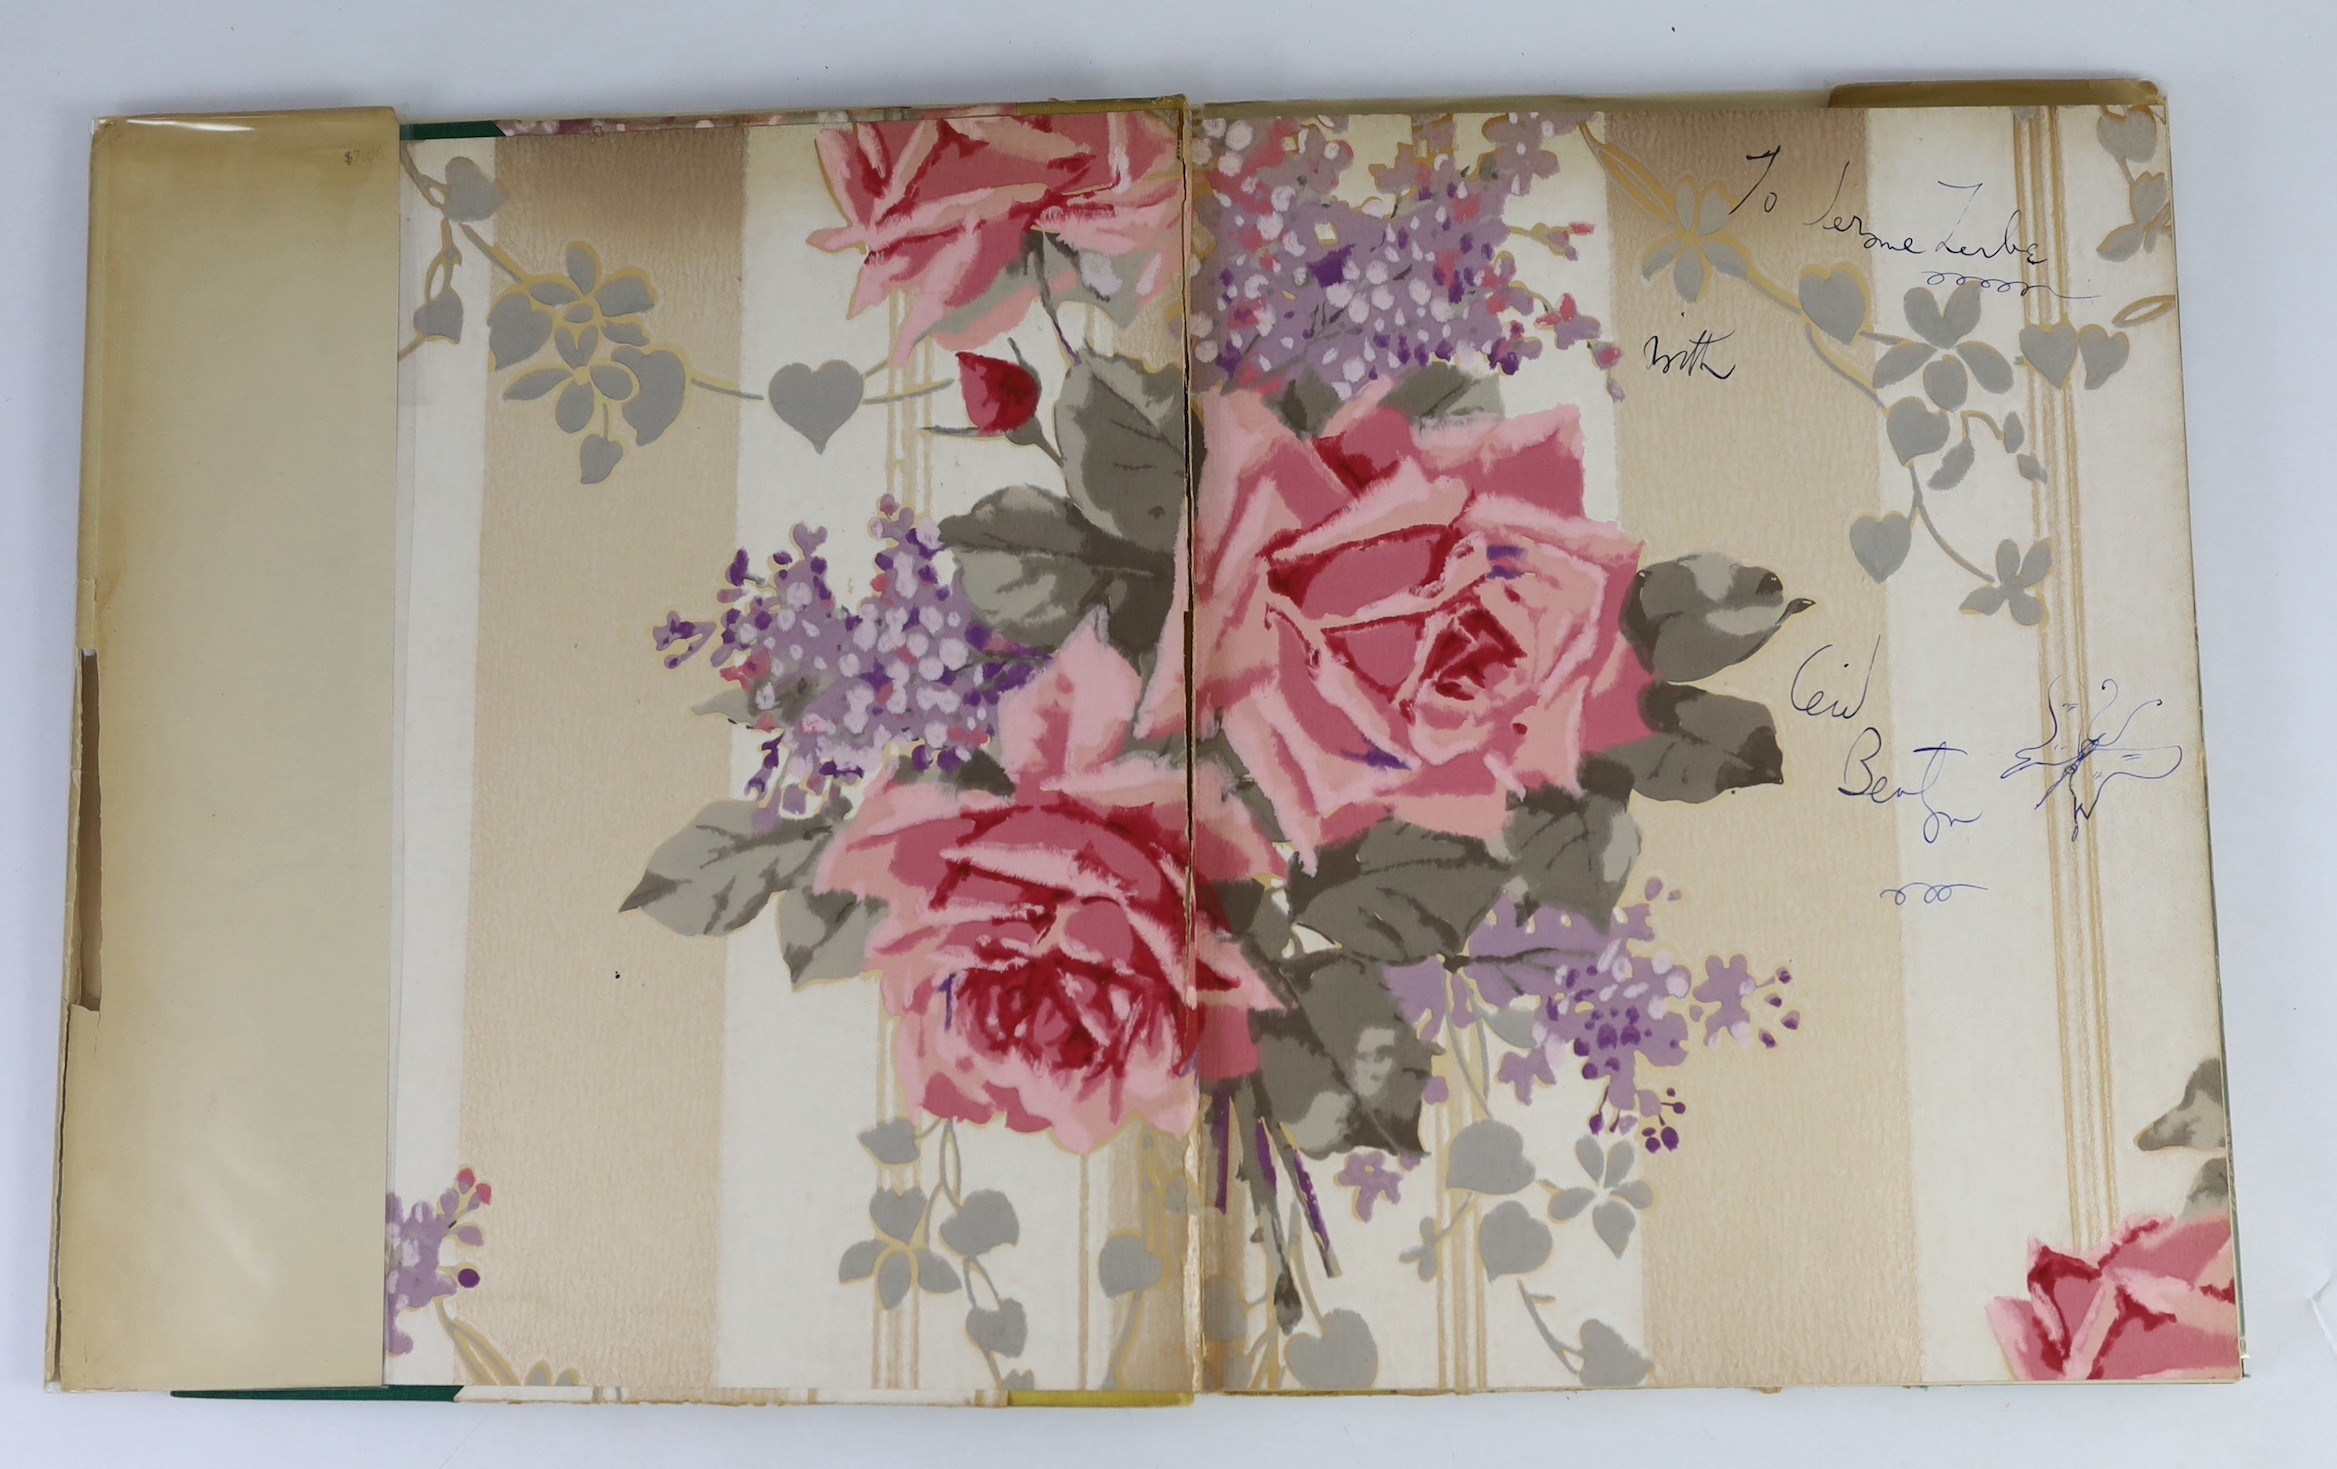 ° ° Beaton, Cecil - Cecil Beaton's Scrapbook. First Edition - inscribed by author to the 'high' - Image 6 of 6